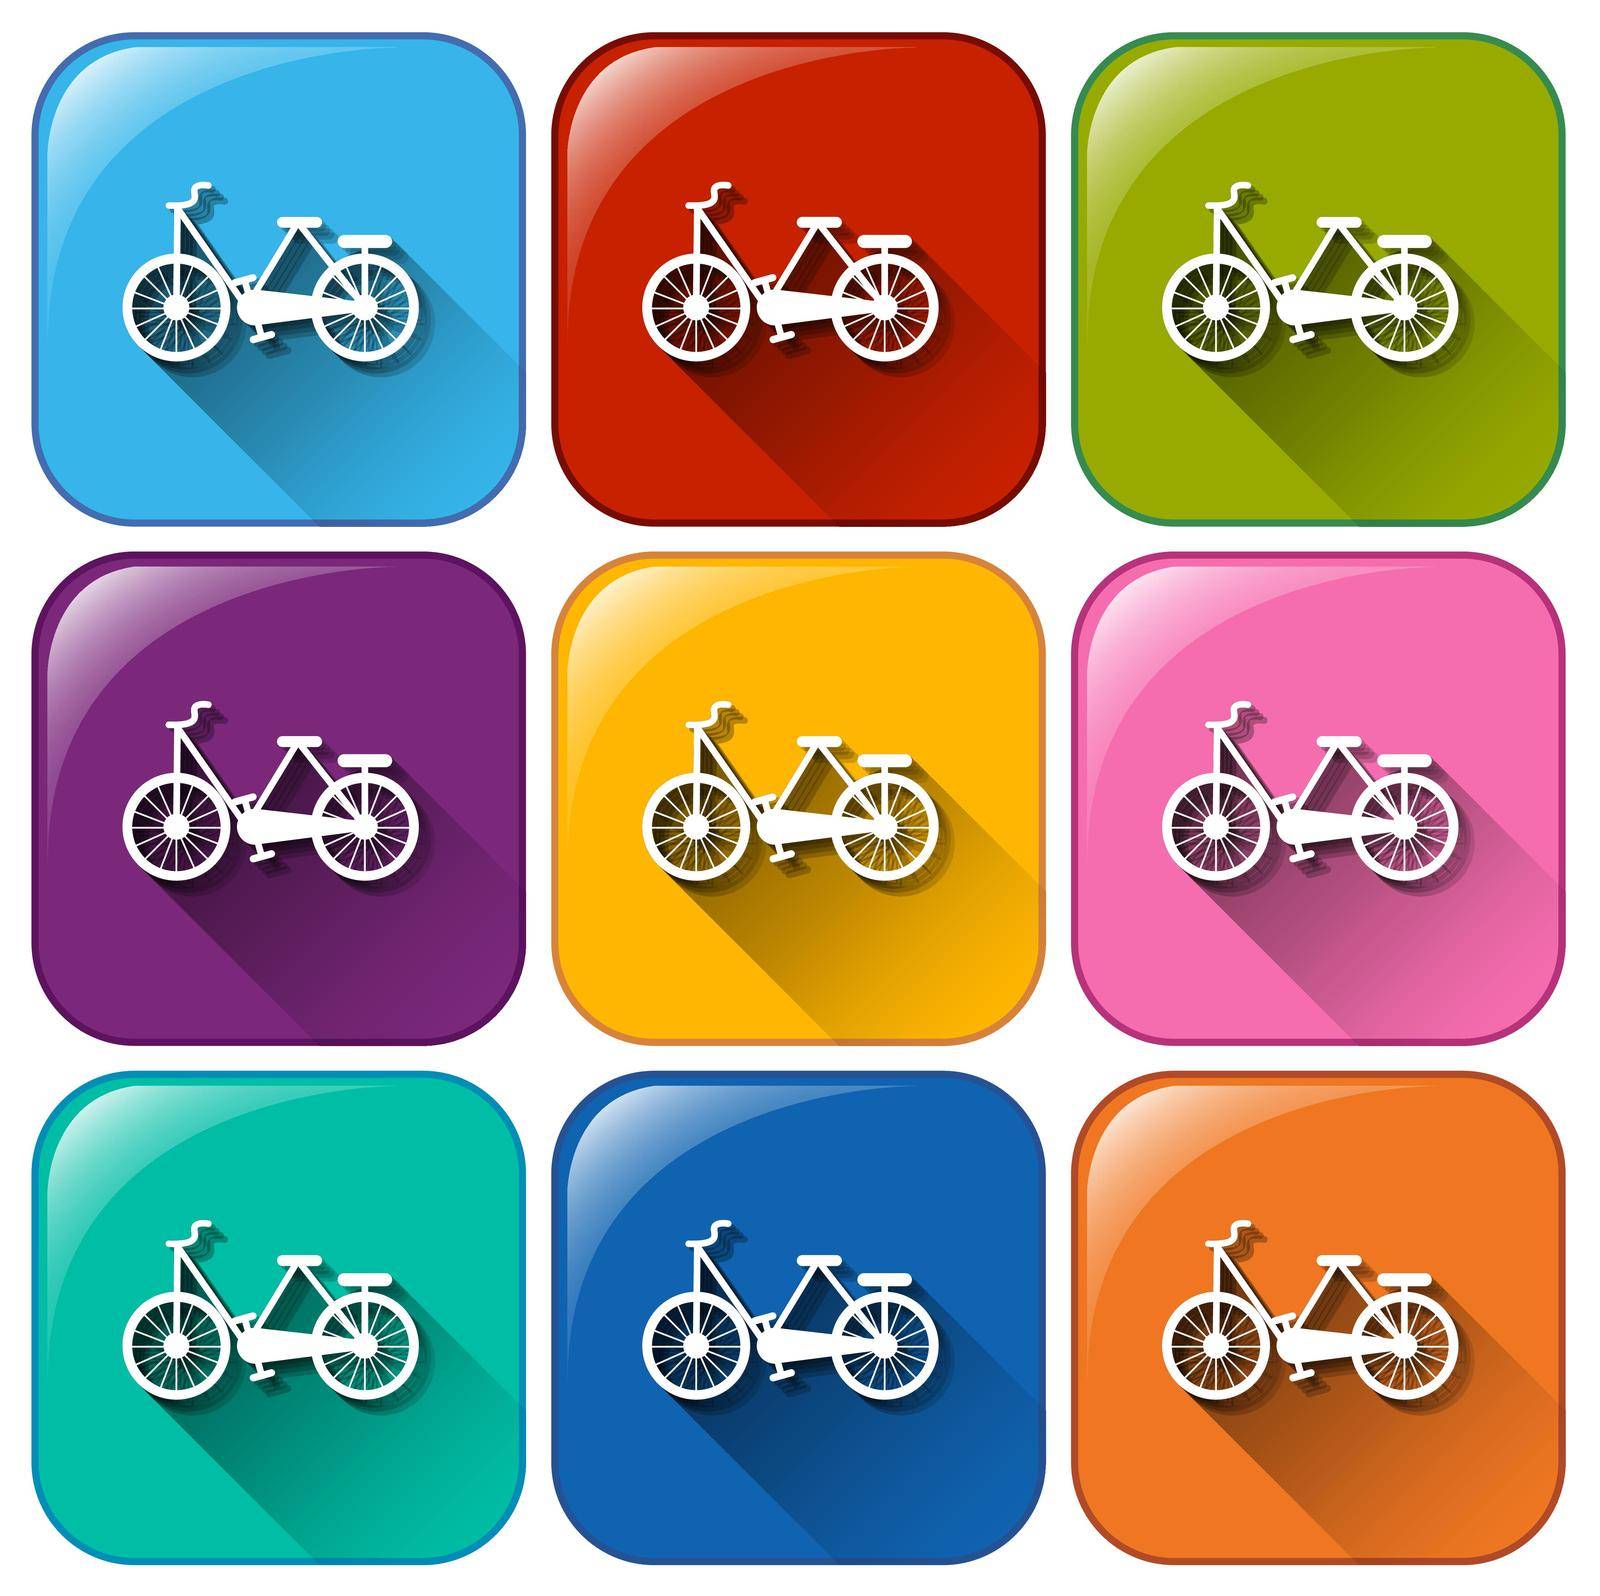 Buttons with pushbikes on a white background